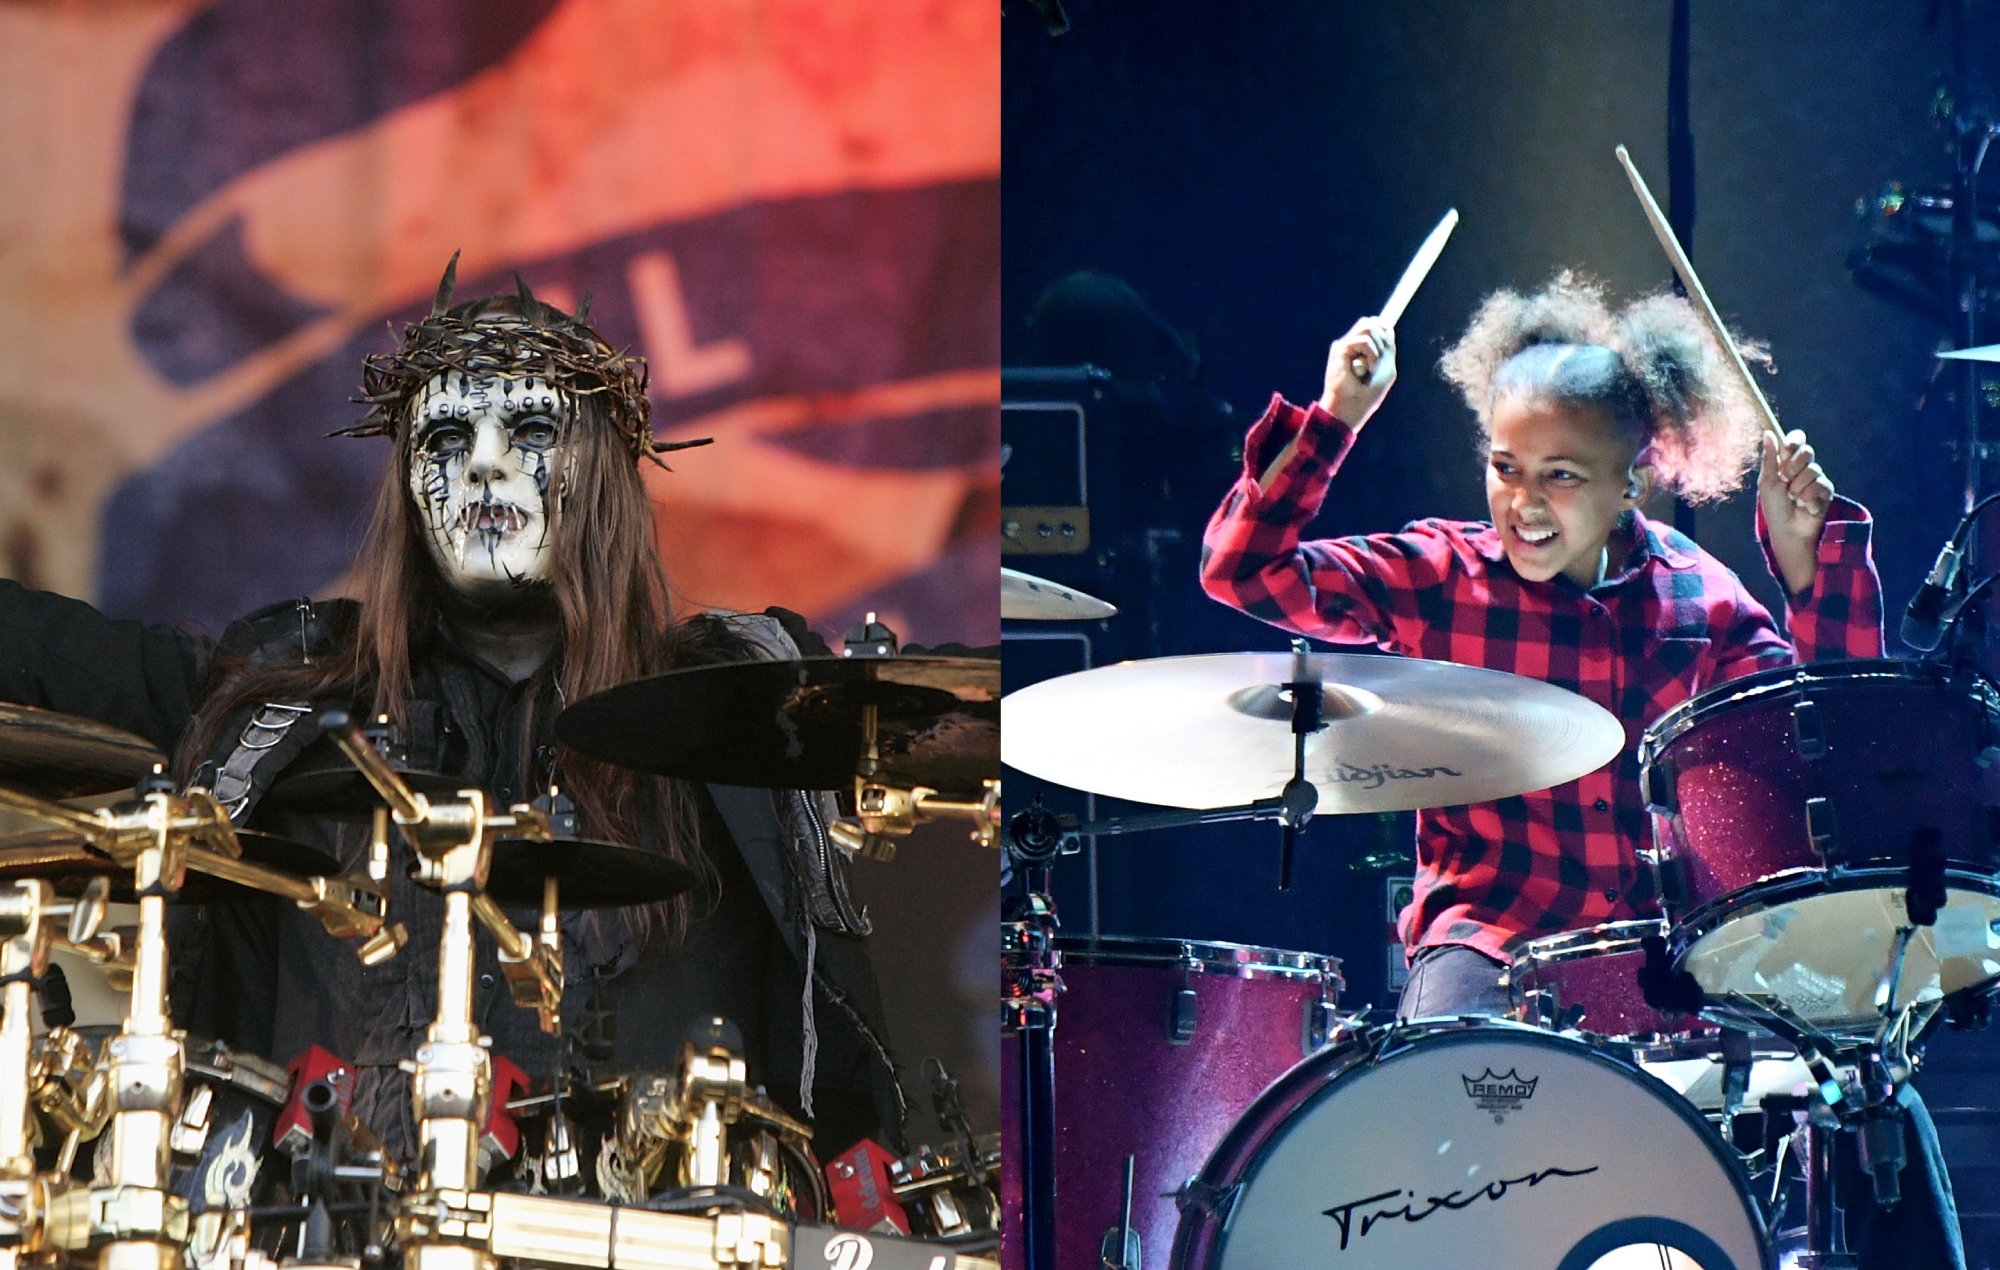 Nandi Bushell gets into Halloween mood with drum cover of Slipknot’s ‘Psychosocial’